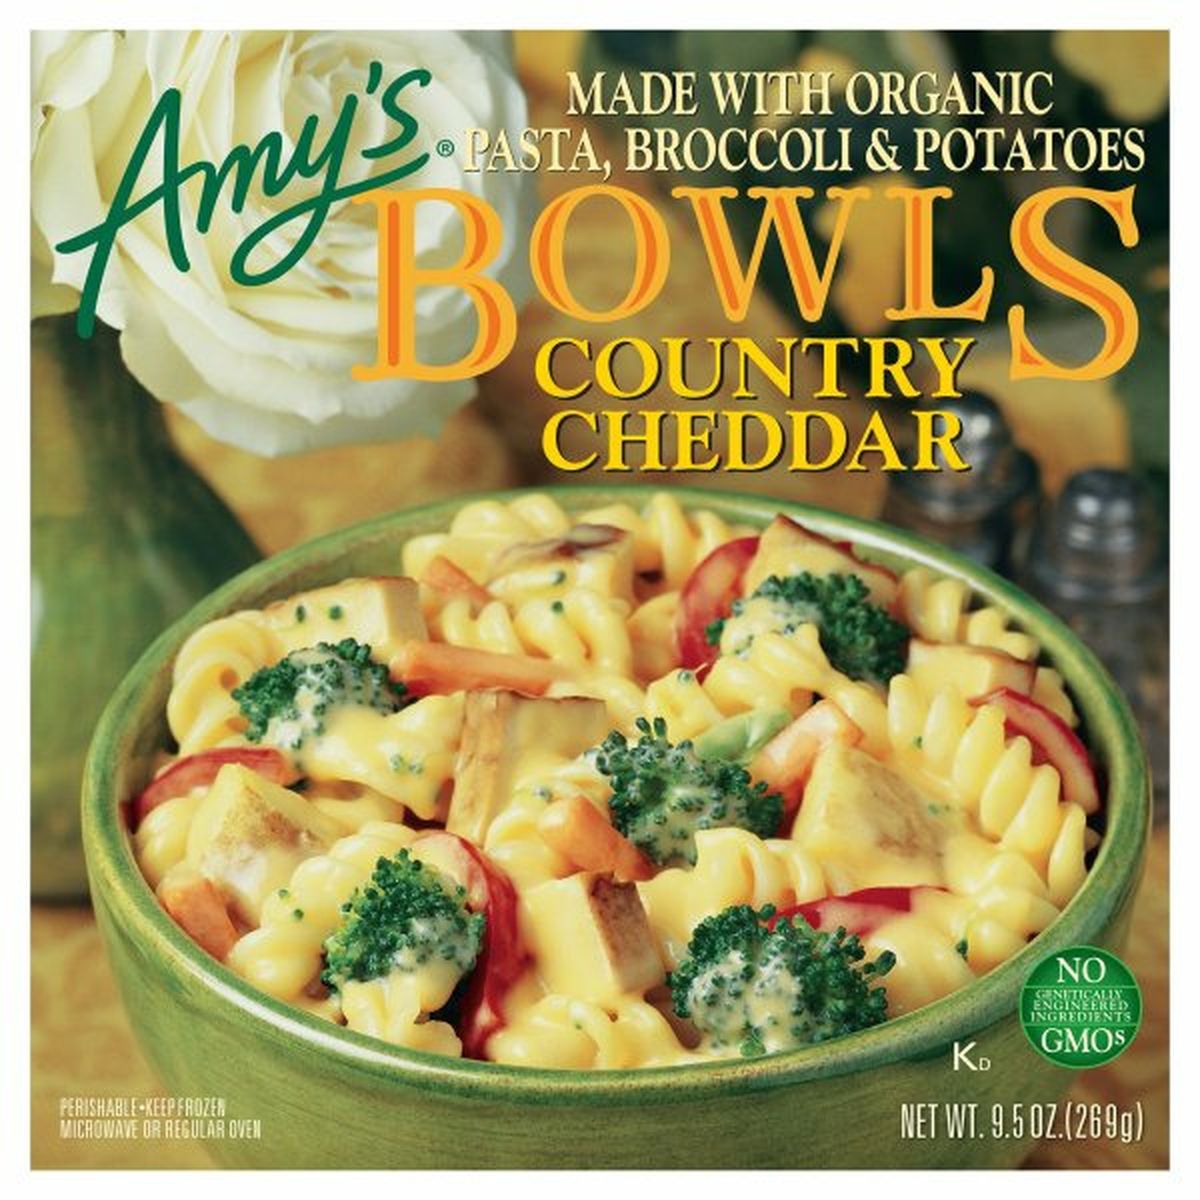 Calories in Amy's Kitchen Bowls Country Cheddar